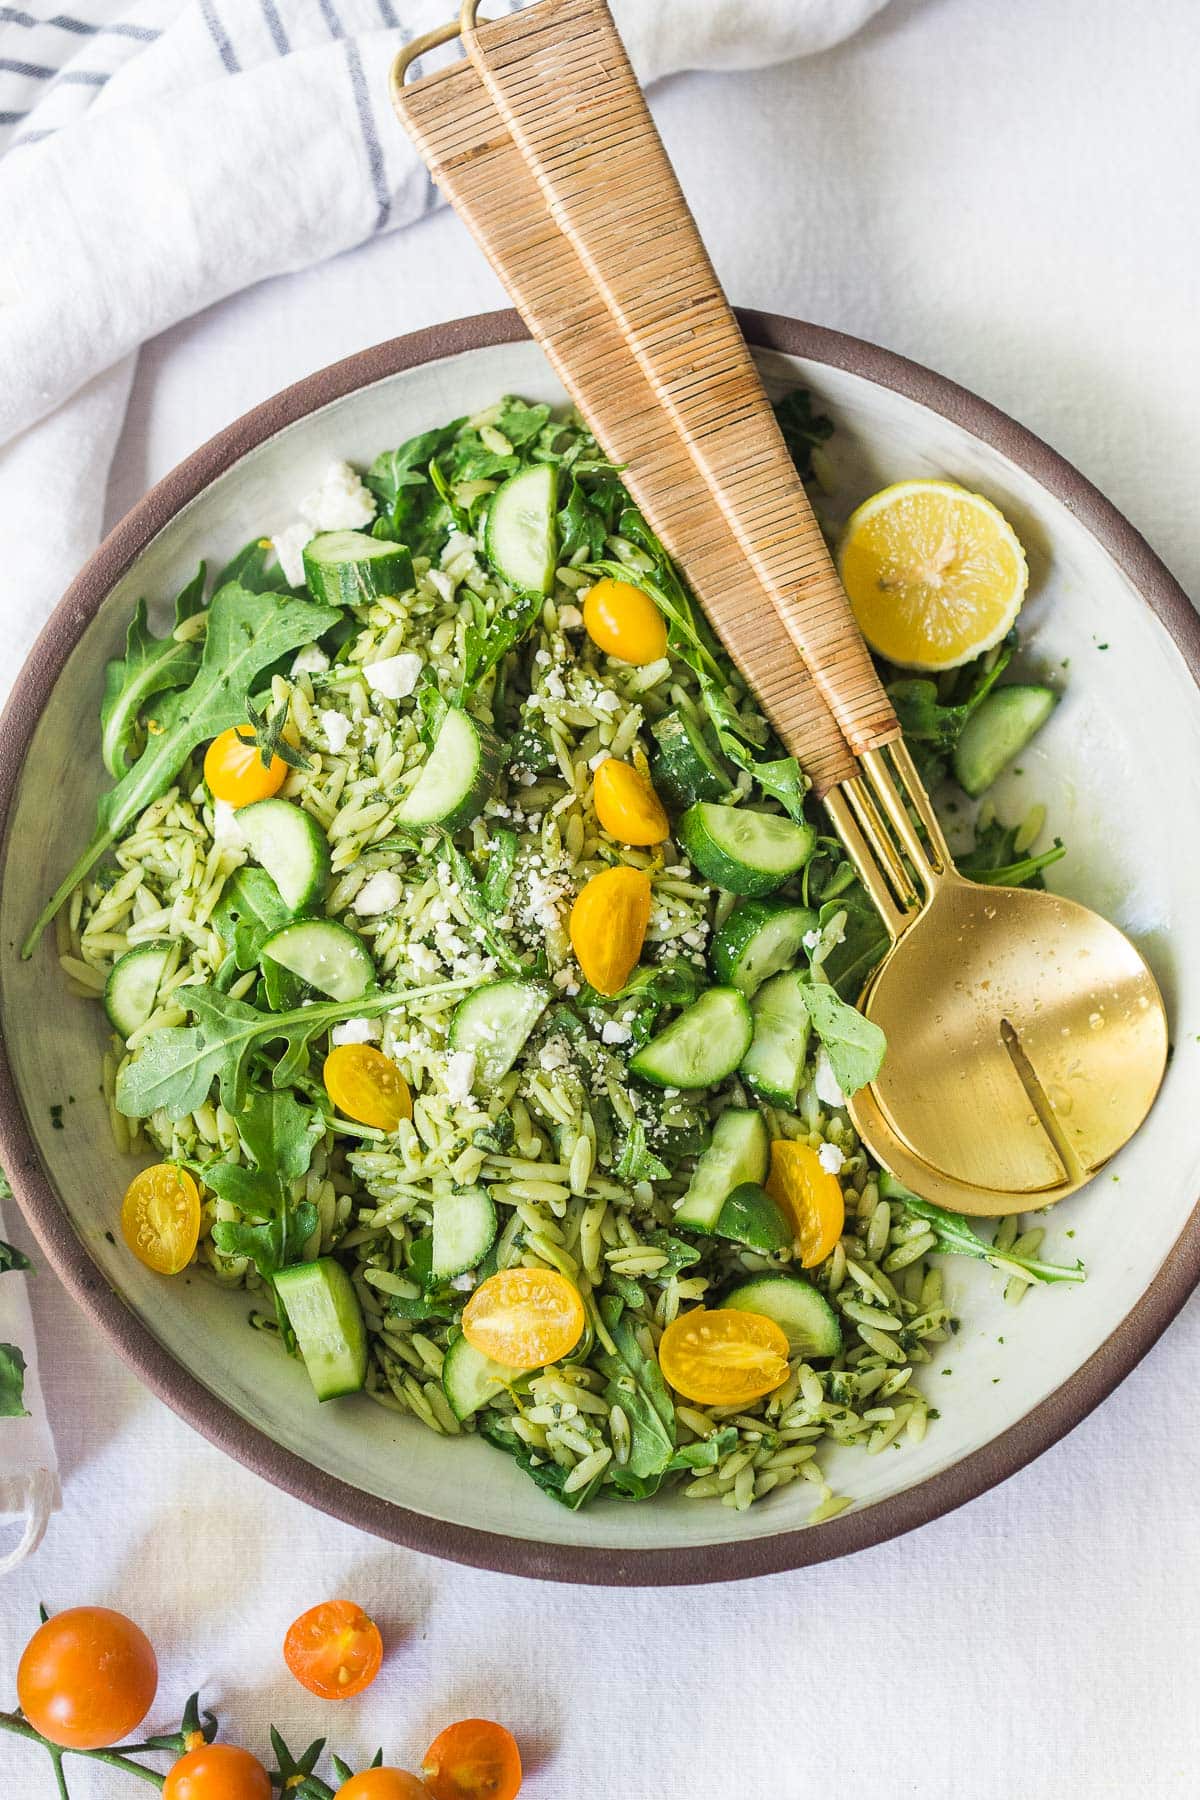 This Orzo Salad is tossed with a lemon basil dressing, with fresh cucumbers, tomatoes and arugula. A healthy, vegan, pasta salad that can be made ahead for midweek lunches or potlucks. Keep it vegan or add feta! 